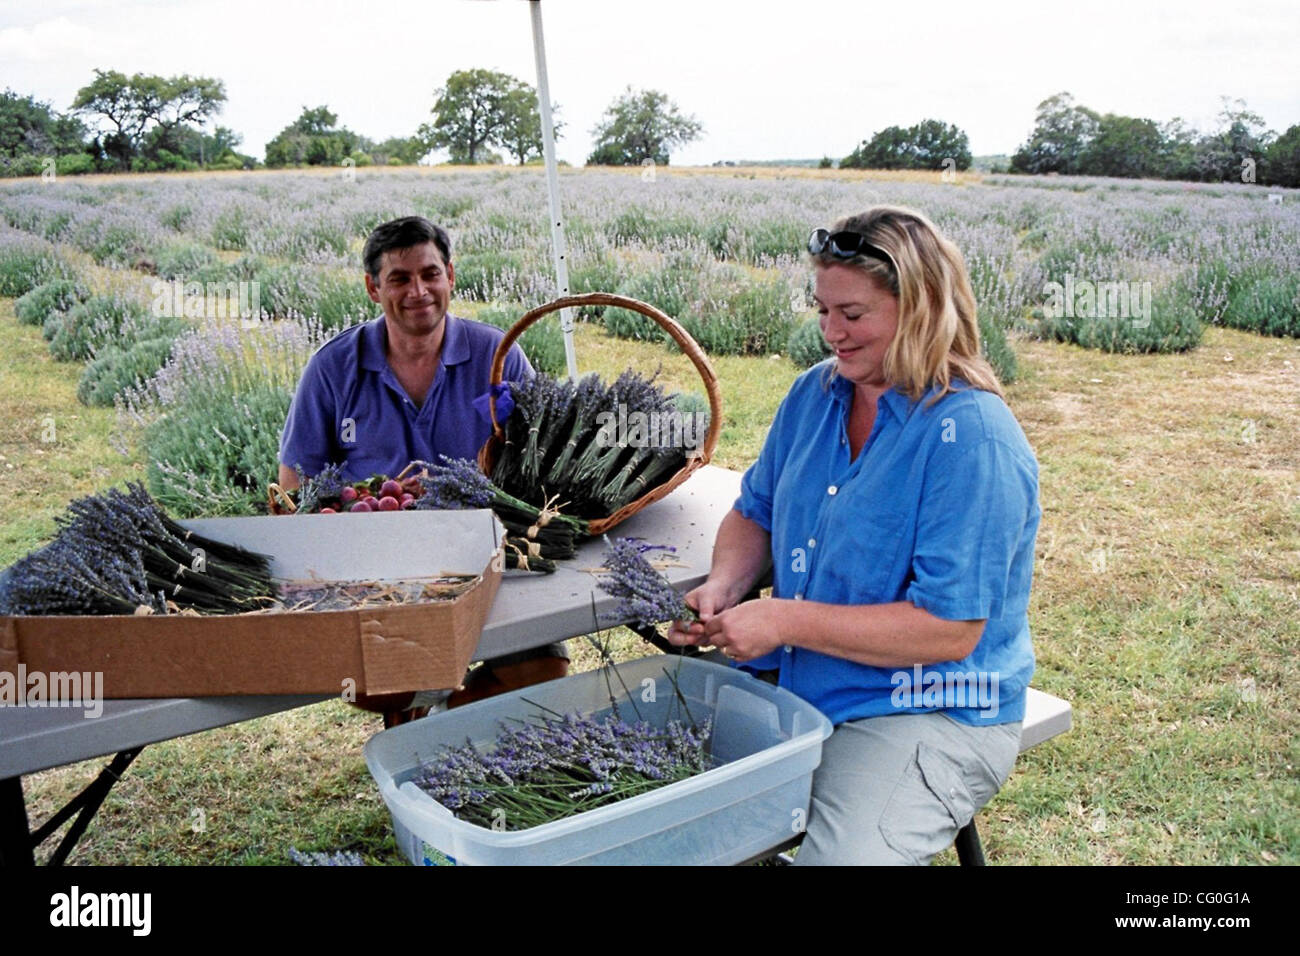 Karen and O'Neil Provost saw an opportunity to steward their own piece of  land when they bought a piece of property outside Wimberly and planted a  lavender farm and garden where they